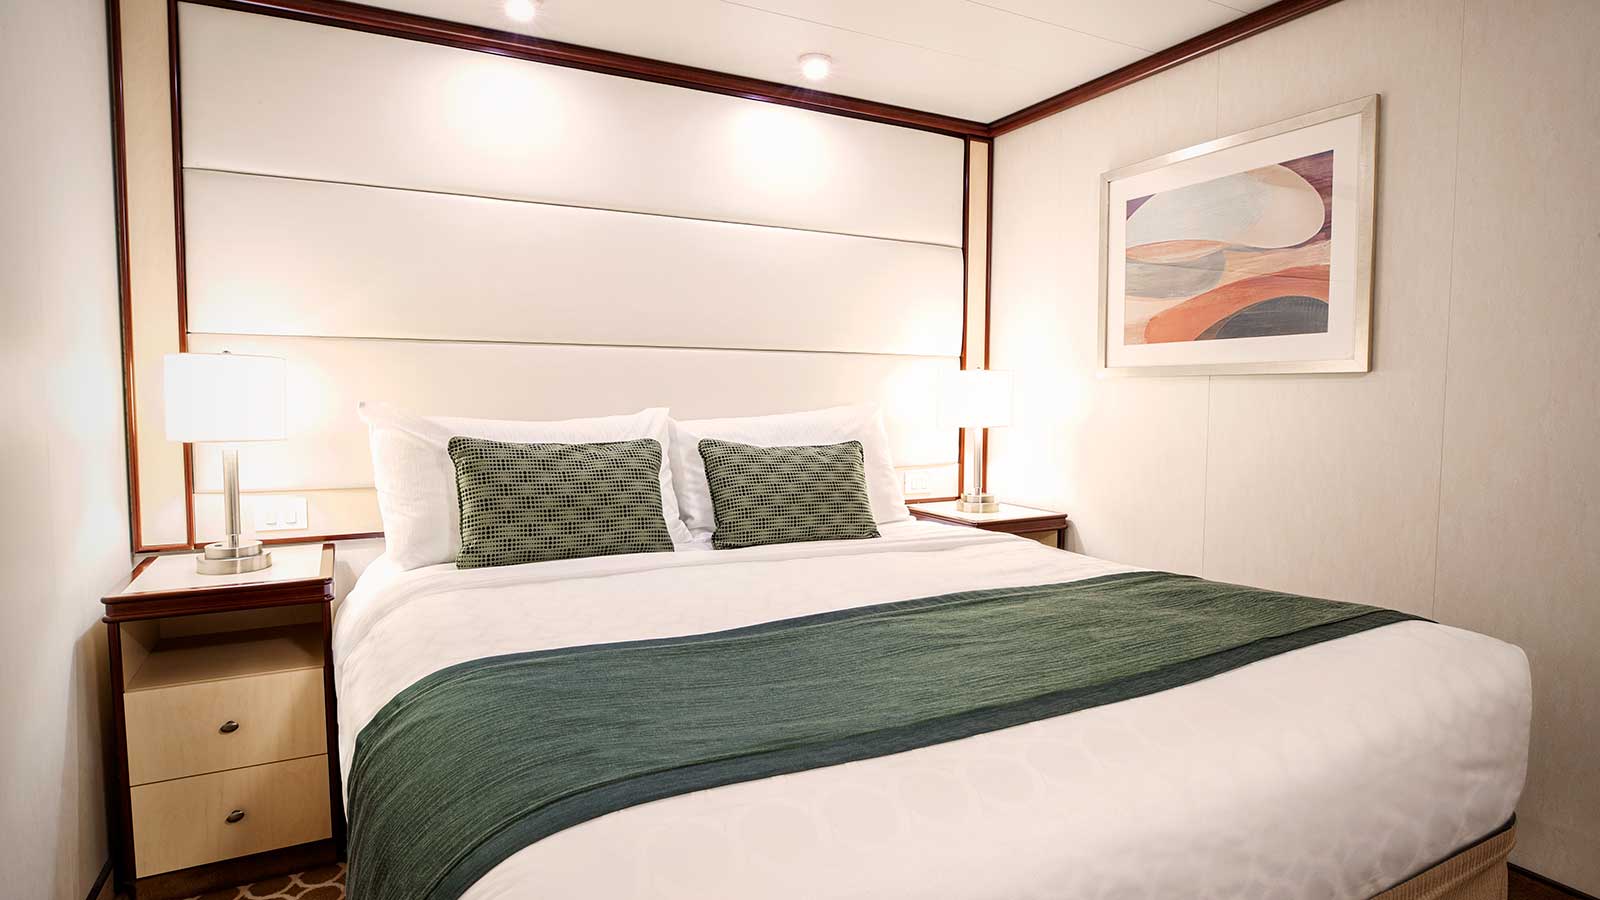 Image of Interior Accommodation, sourced from: Princess Cruise Lines https://touristwire.com/wp-content/uploads/2023/06/royal-class-interior-1600.jpg